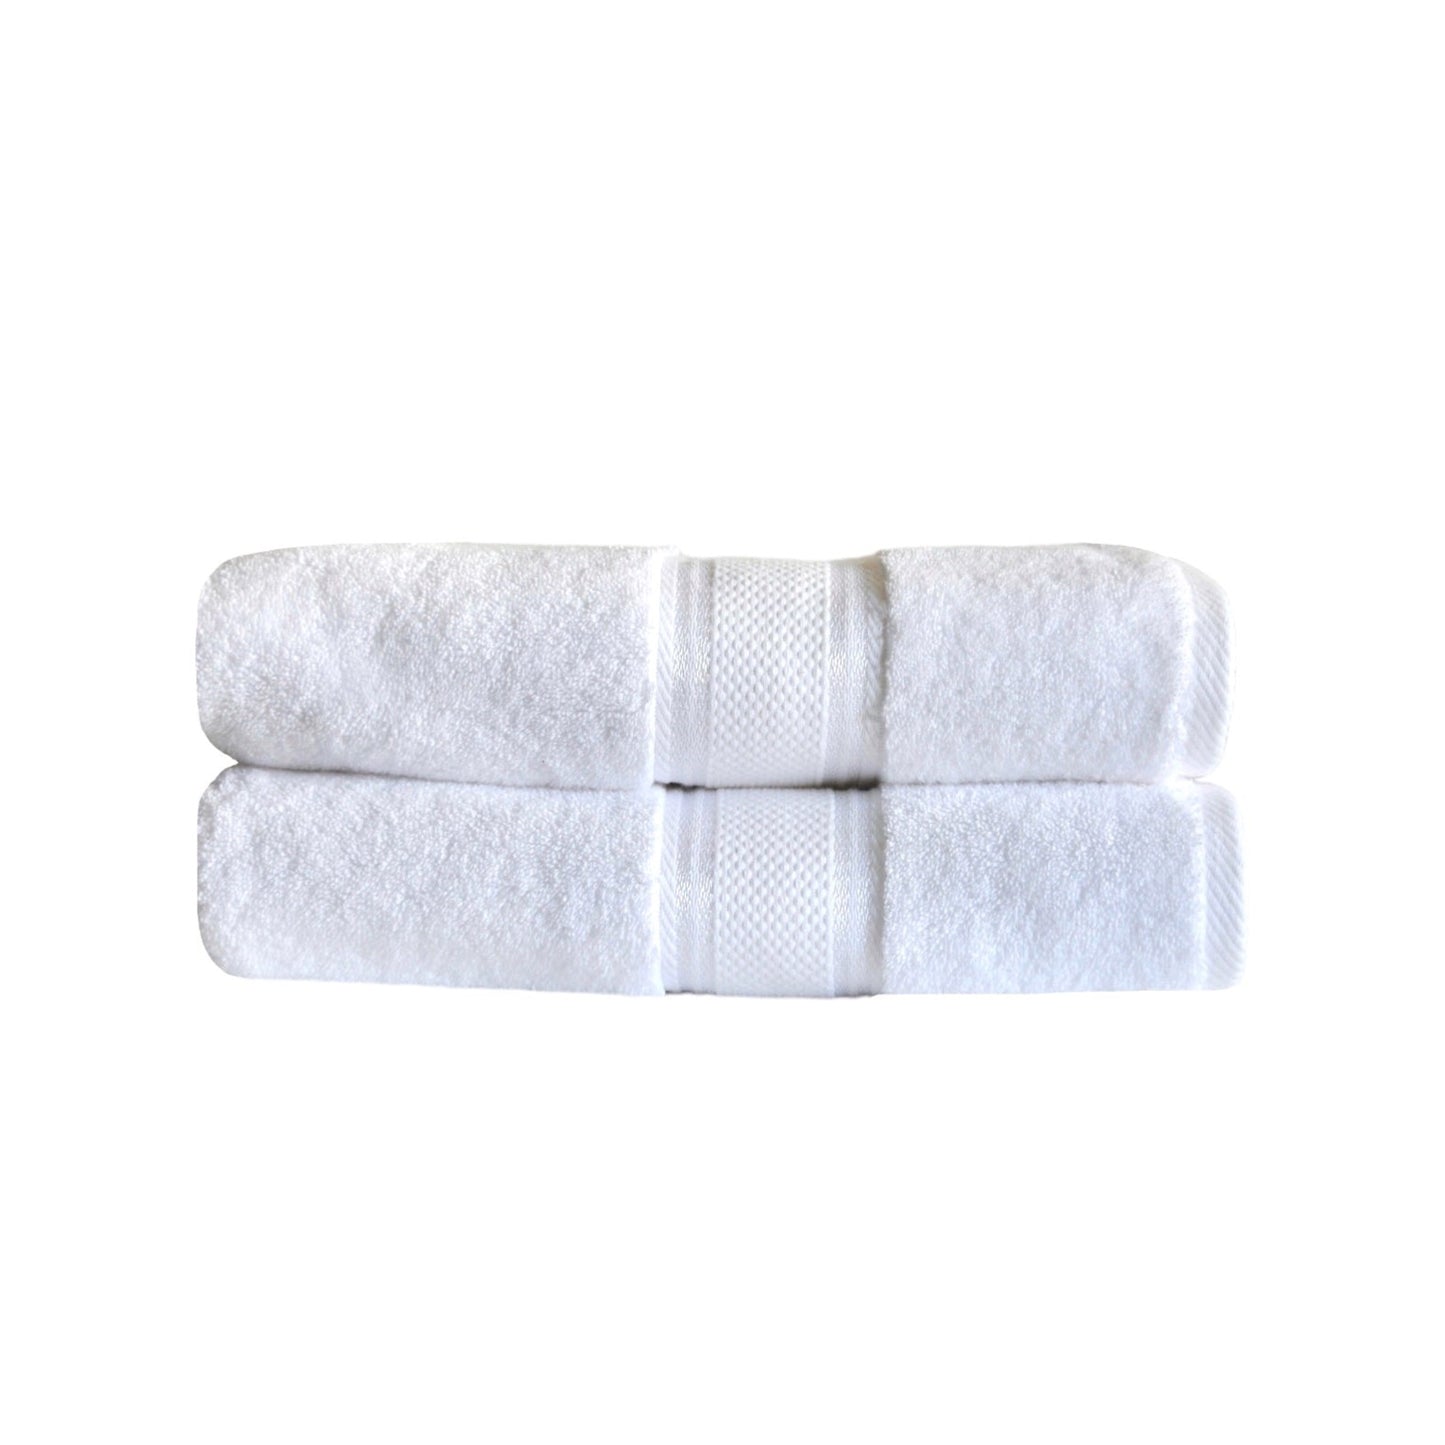 Turkish Cotton Towel Set in White color